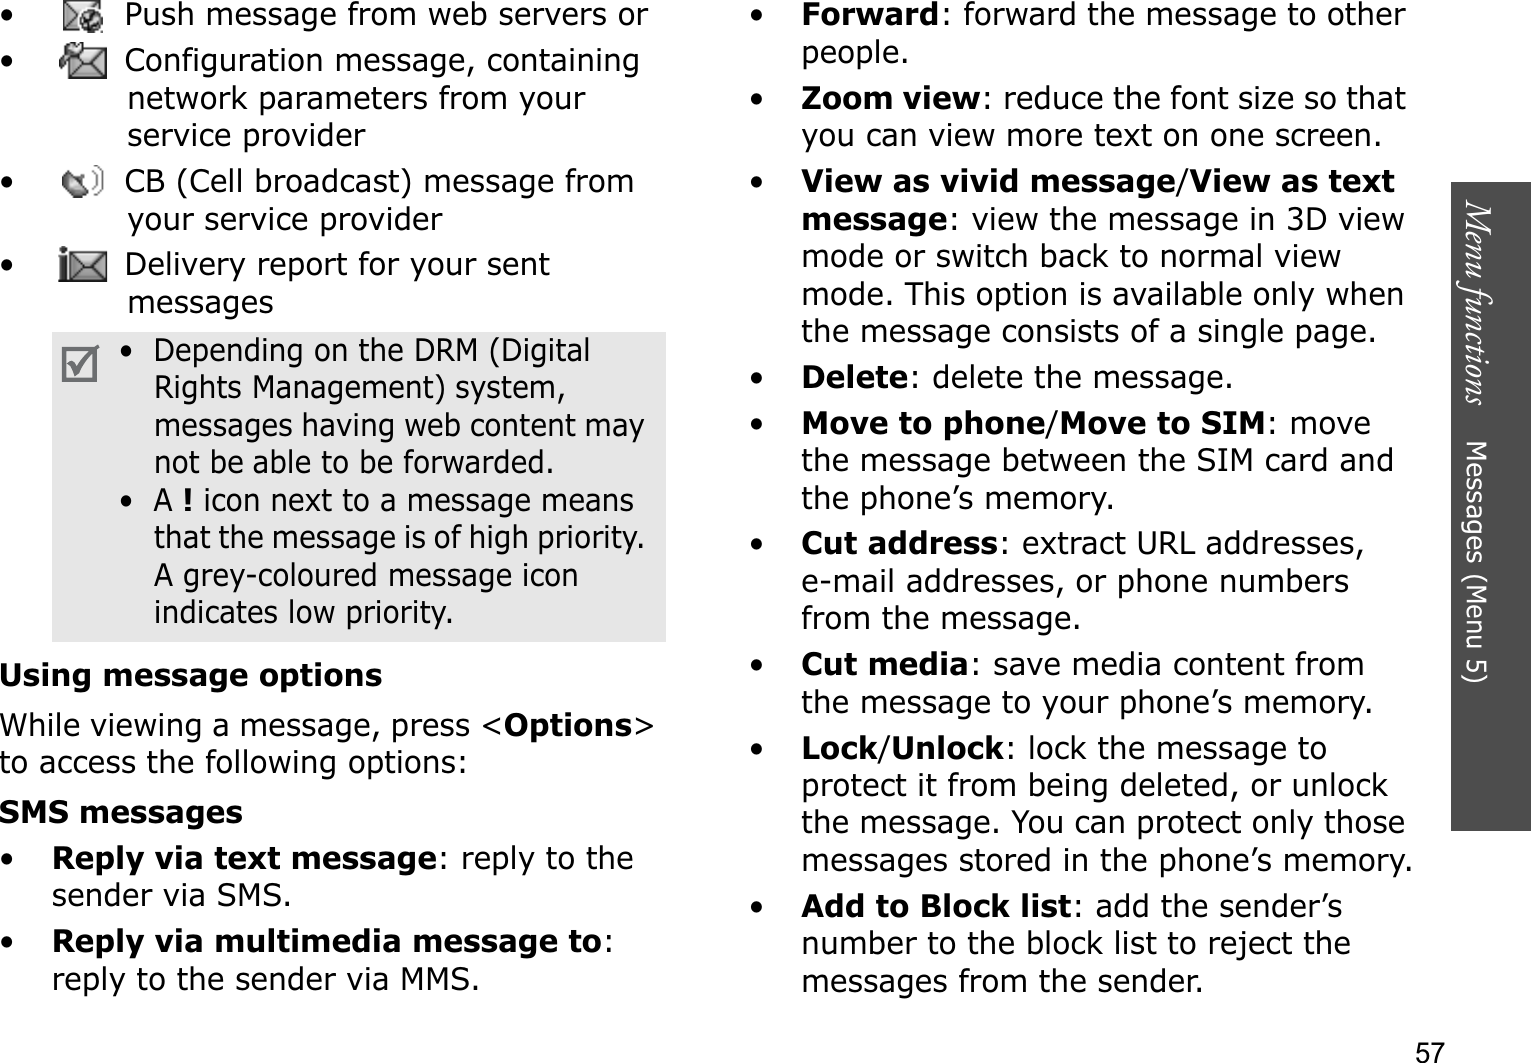 Menu functions    Messages (Menu 5)57•  Push message from web servers or •  Configuration message, containing network parameters from your service provider•  CB (Cell broadcast) message from your service provider•  Delivery report for your sent messagesUsing message optionsWhile viewing a message, press &lt;Options&gt;to access the following options:SMS messages•Reply via text message: reply to the sender via SMS. •Reply via multimedia message to:reply to the sender via MMS. •Forward: forward the message to other people.•Zoom view: reduce the font size so that you can view more text on one screen.•View as vivid message/View as text message: view the message in 3D view mode or switch back to normal view mode. This option is available only when the message consists of a single page.•Delete: delete the message.•Move to phone/Move to SIM: move the message between the SIM card and the phone’s memory.•Cut address: extract URL addresses, e-mail addresses, or phone numbers from the message.•Cut media: save media content from the message to your phone’s memory.•Lock/Unlock: lock the message to protect it from being deleted, or unlock the message. You can protect only those messages stored in the phone’s memory.•Add to Block list: add the sender’s number to the block list to reject the messages from the sender.•  Depending on the DRM (Digital Rights Management) system, messages having web content may not be able to be forwarded.•  A !icon next to a message means that the message is of high priority. A grey-coloured message icon indicates low priority.